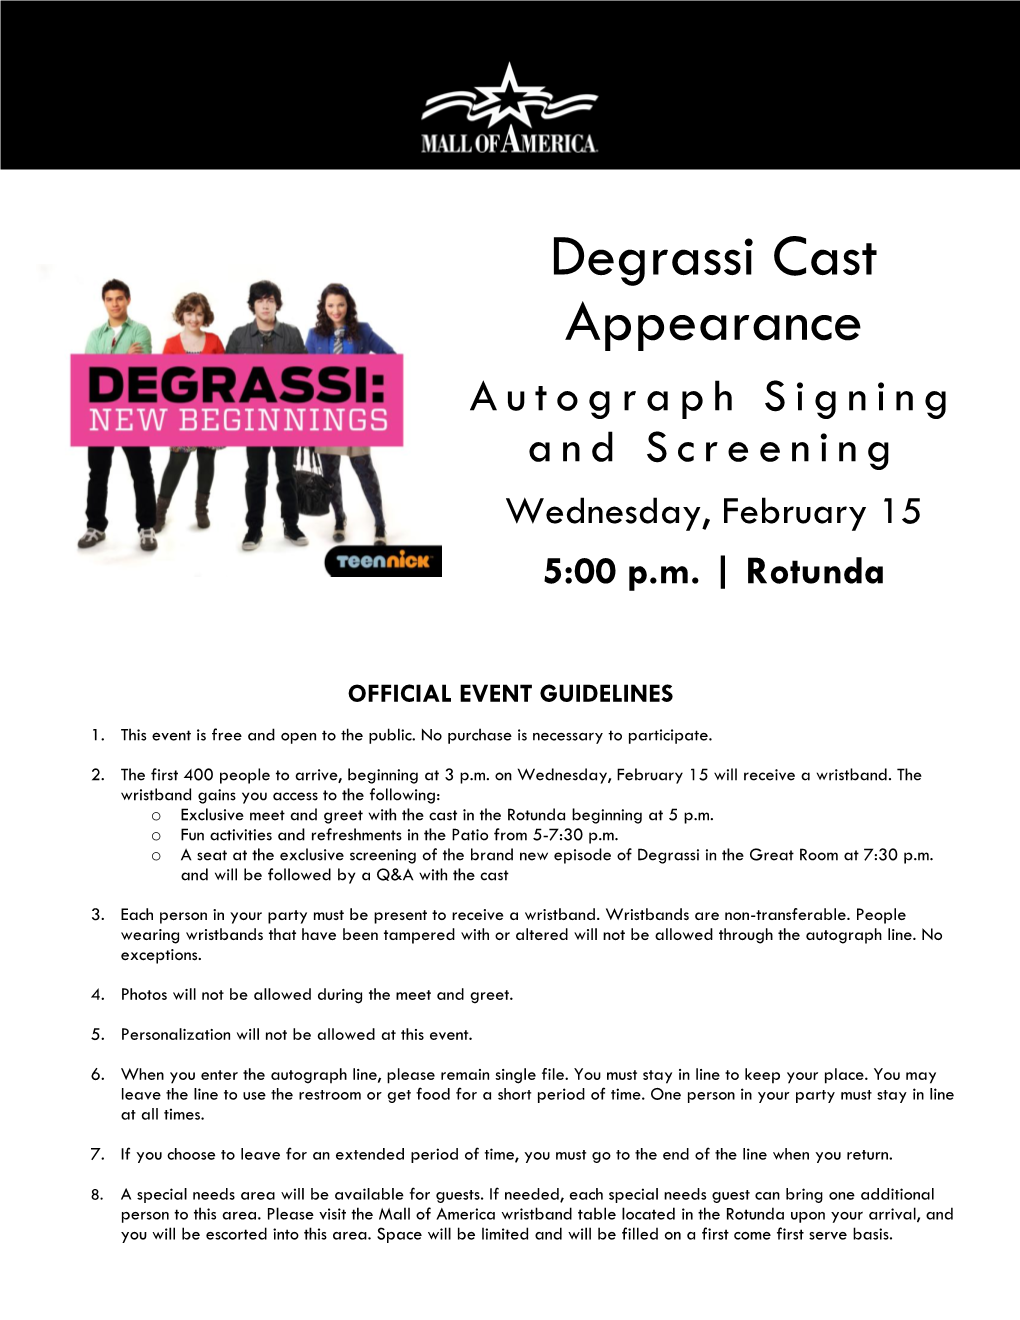 Degrassi Cast Appearance Autograph Signing and Screening Wednesday, February 15 5:00 P.M